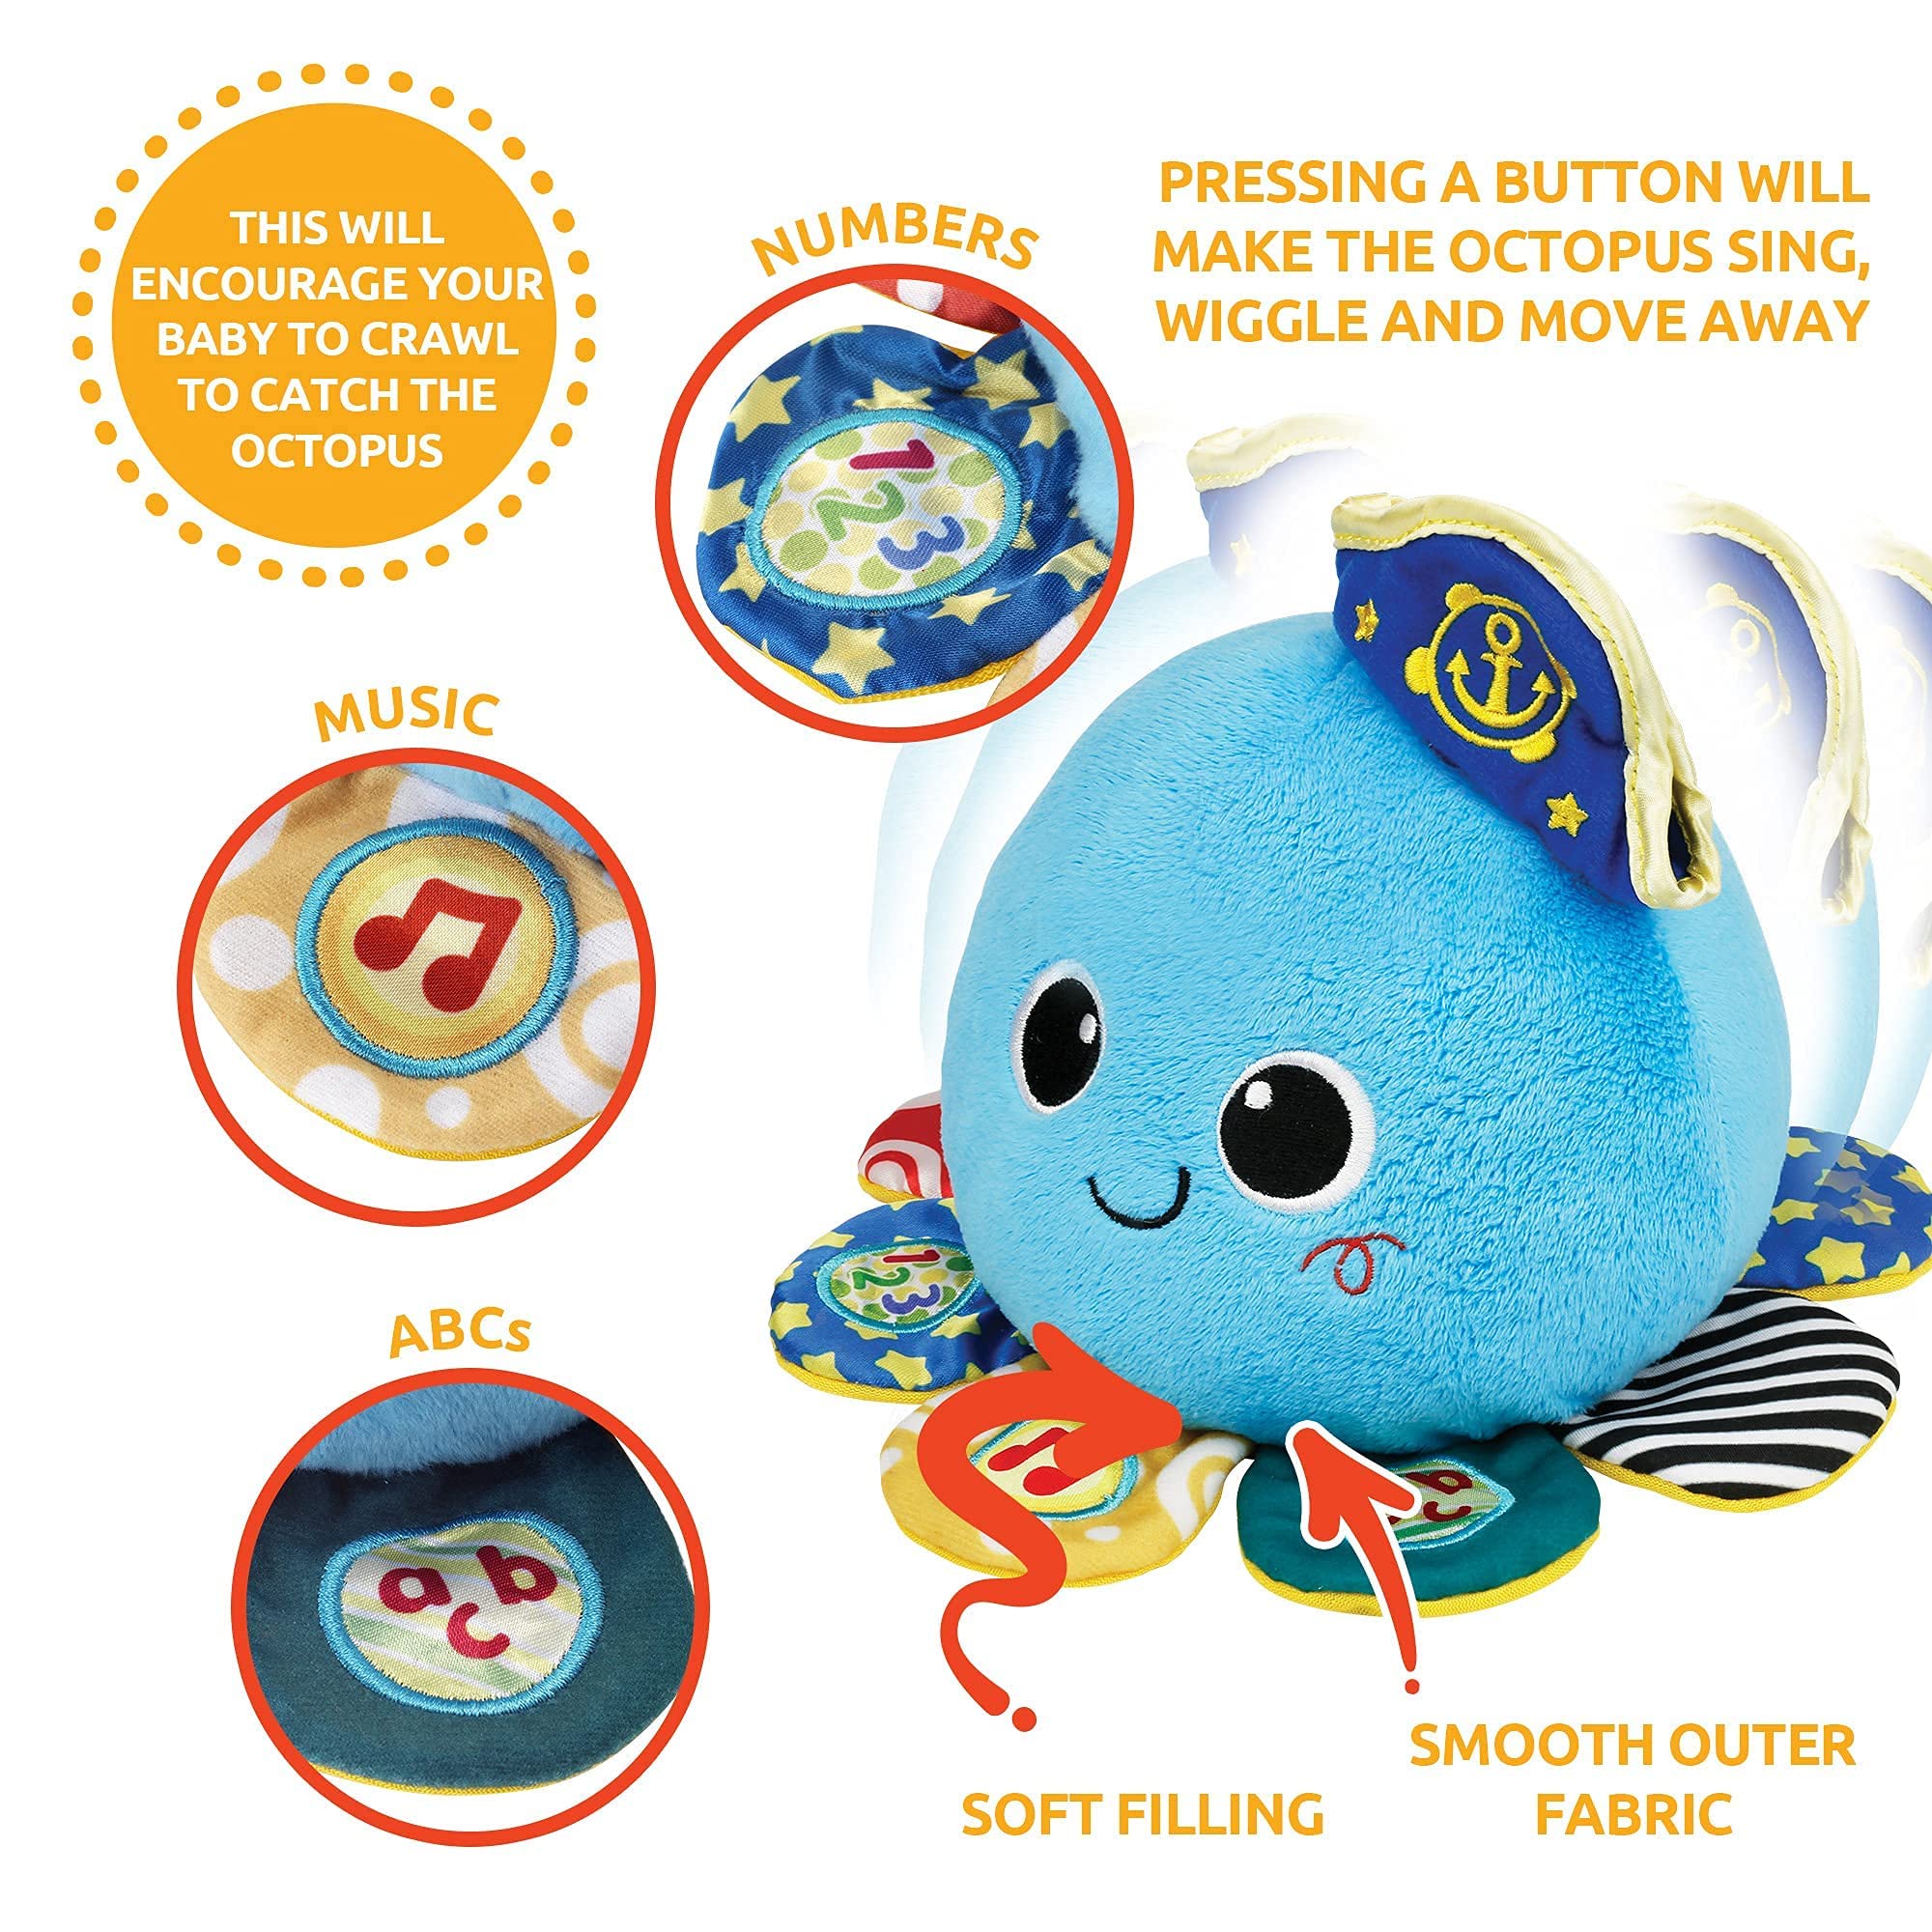 KiddoLab Combo: Octopus Plush Sensory Toy for ABC & Number Learning + Jungle Animal Roll & Learn Activity Ball with Lights and Sounds for Babies 6 Months & Above.